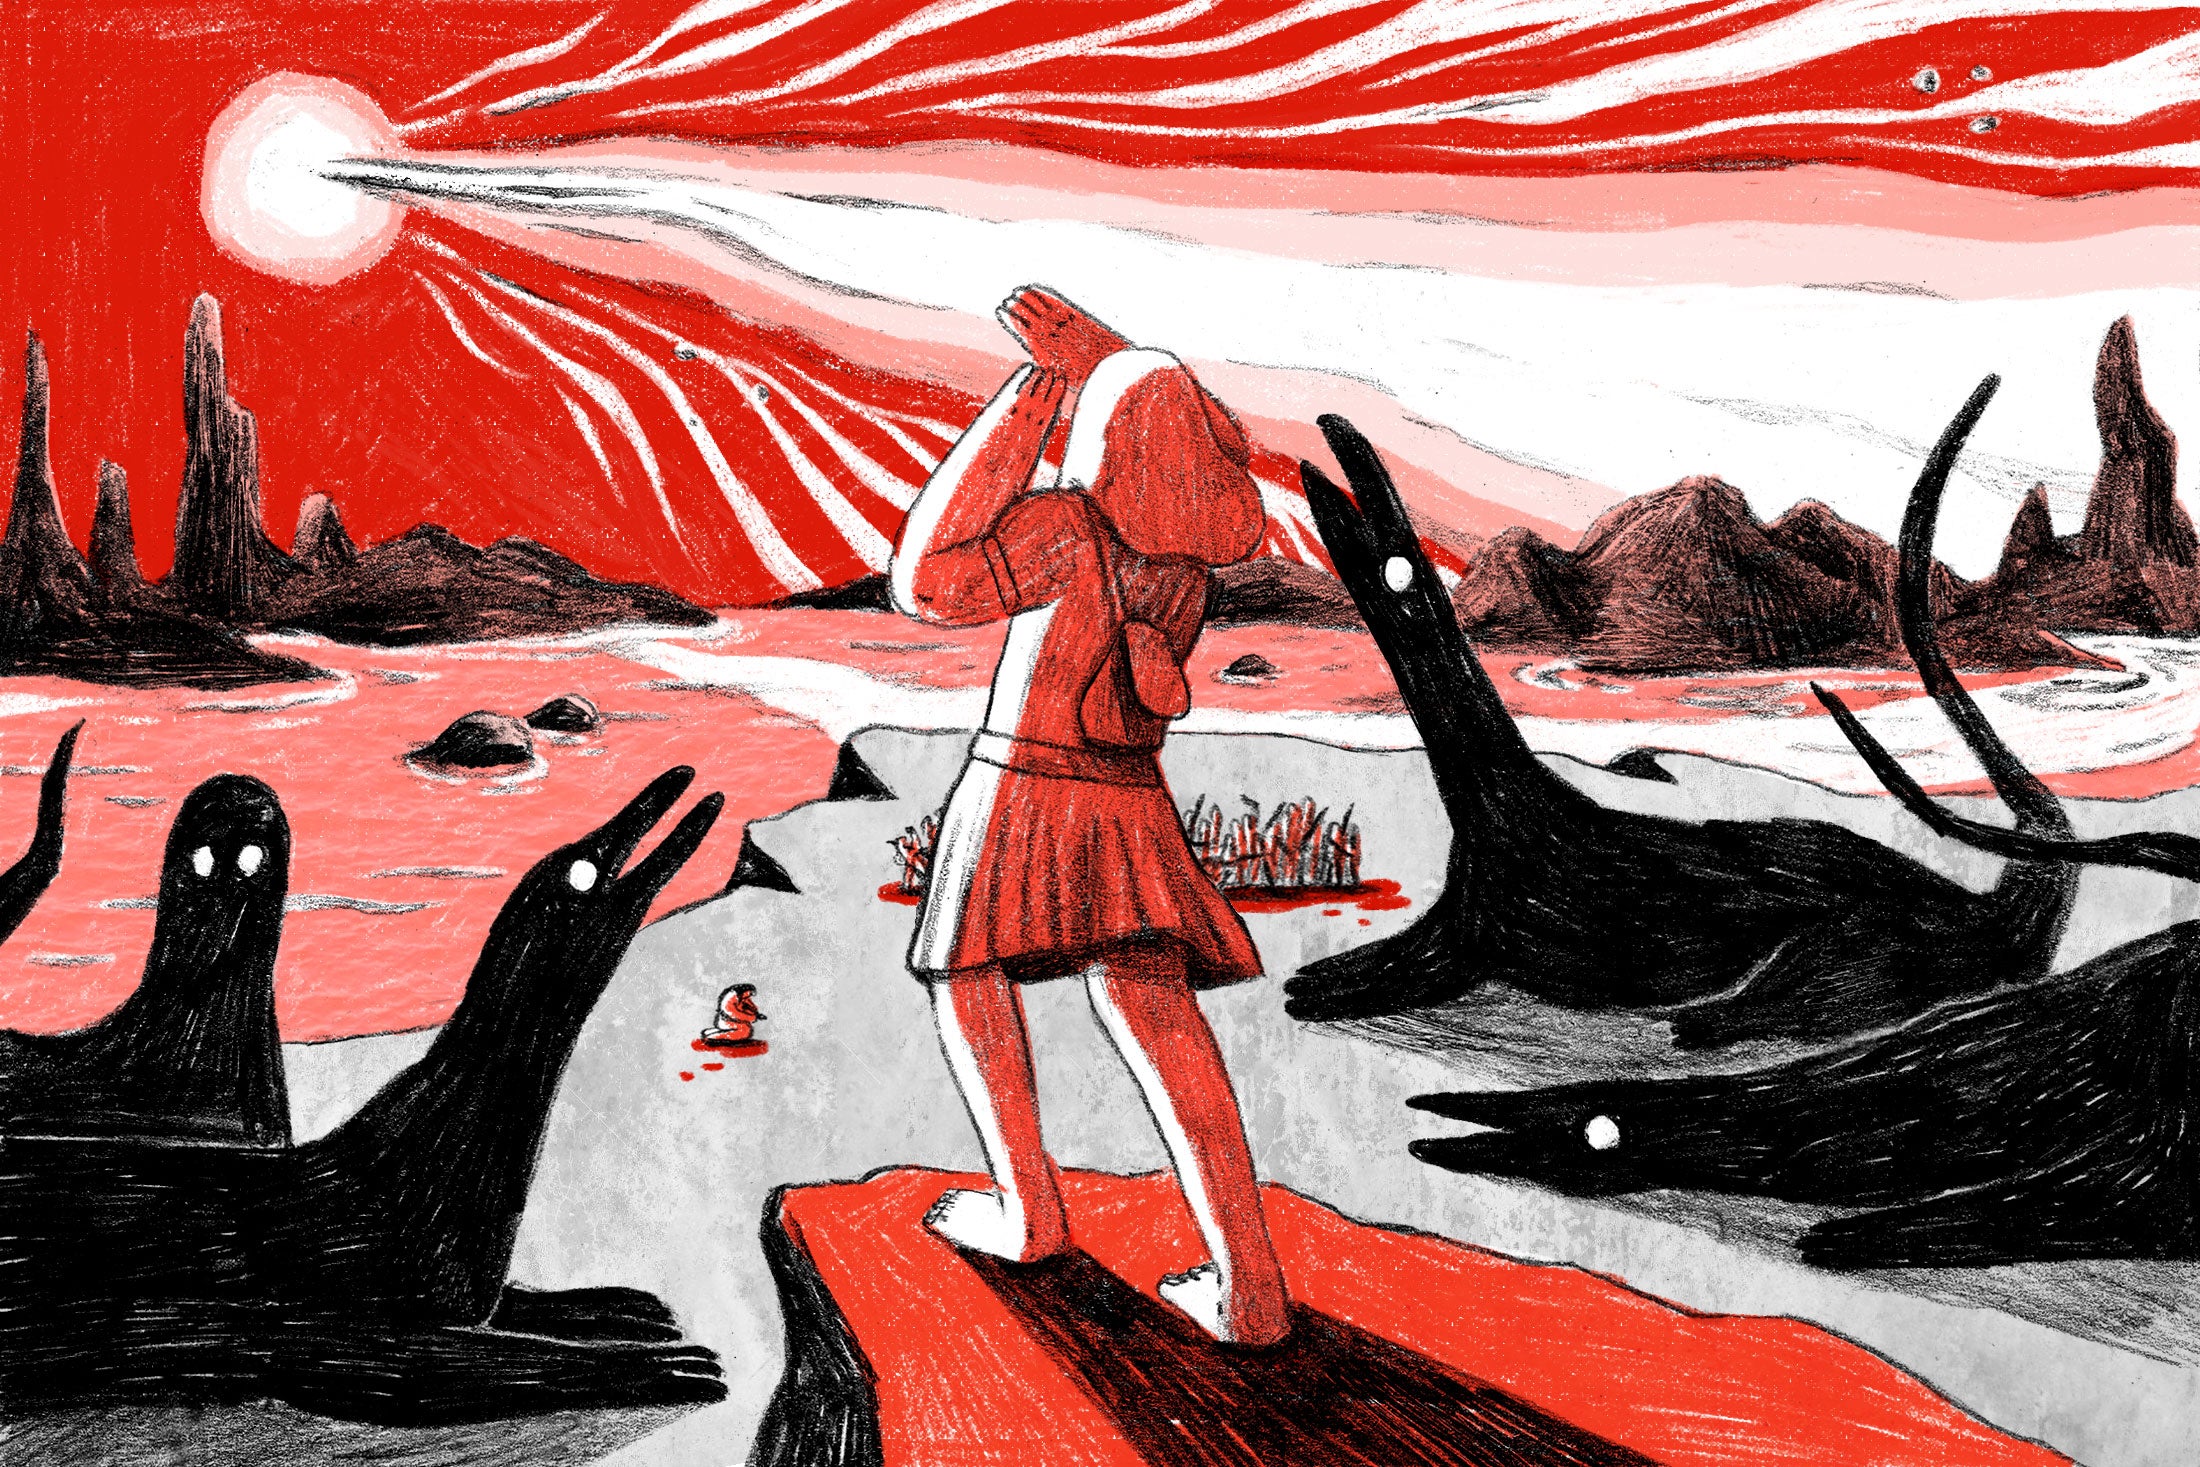 Illustration: A wandering woman journeys through a harsh and unforgiving landscape.